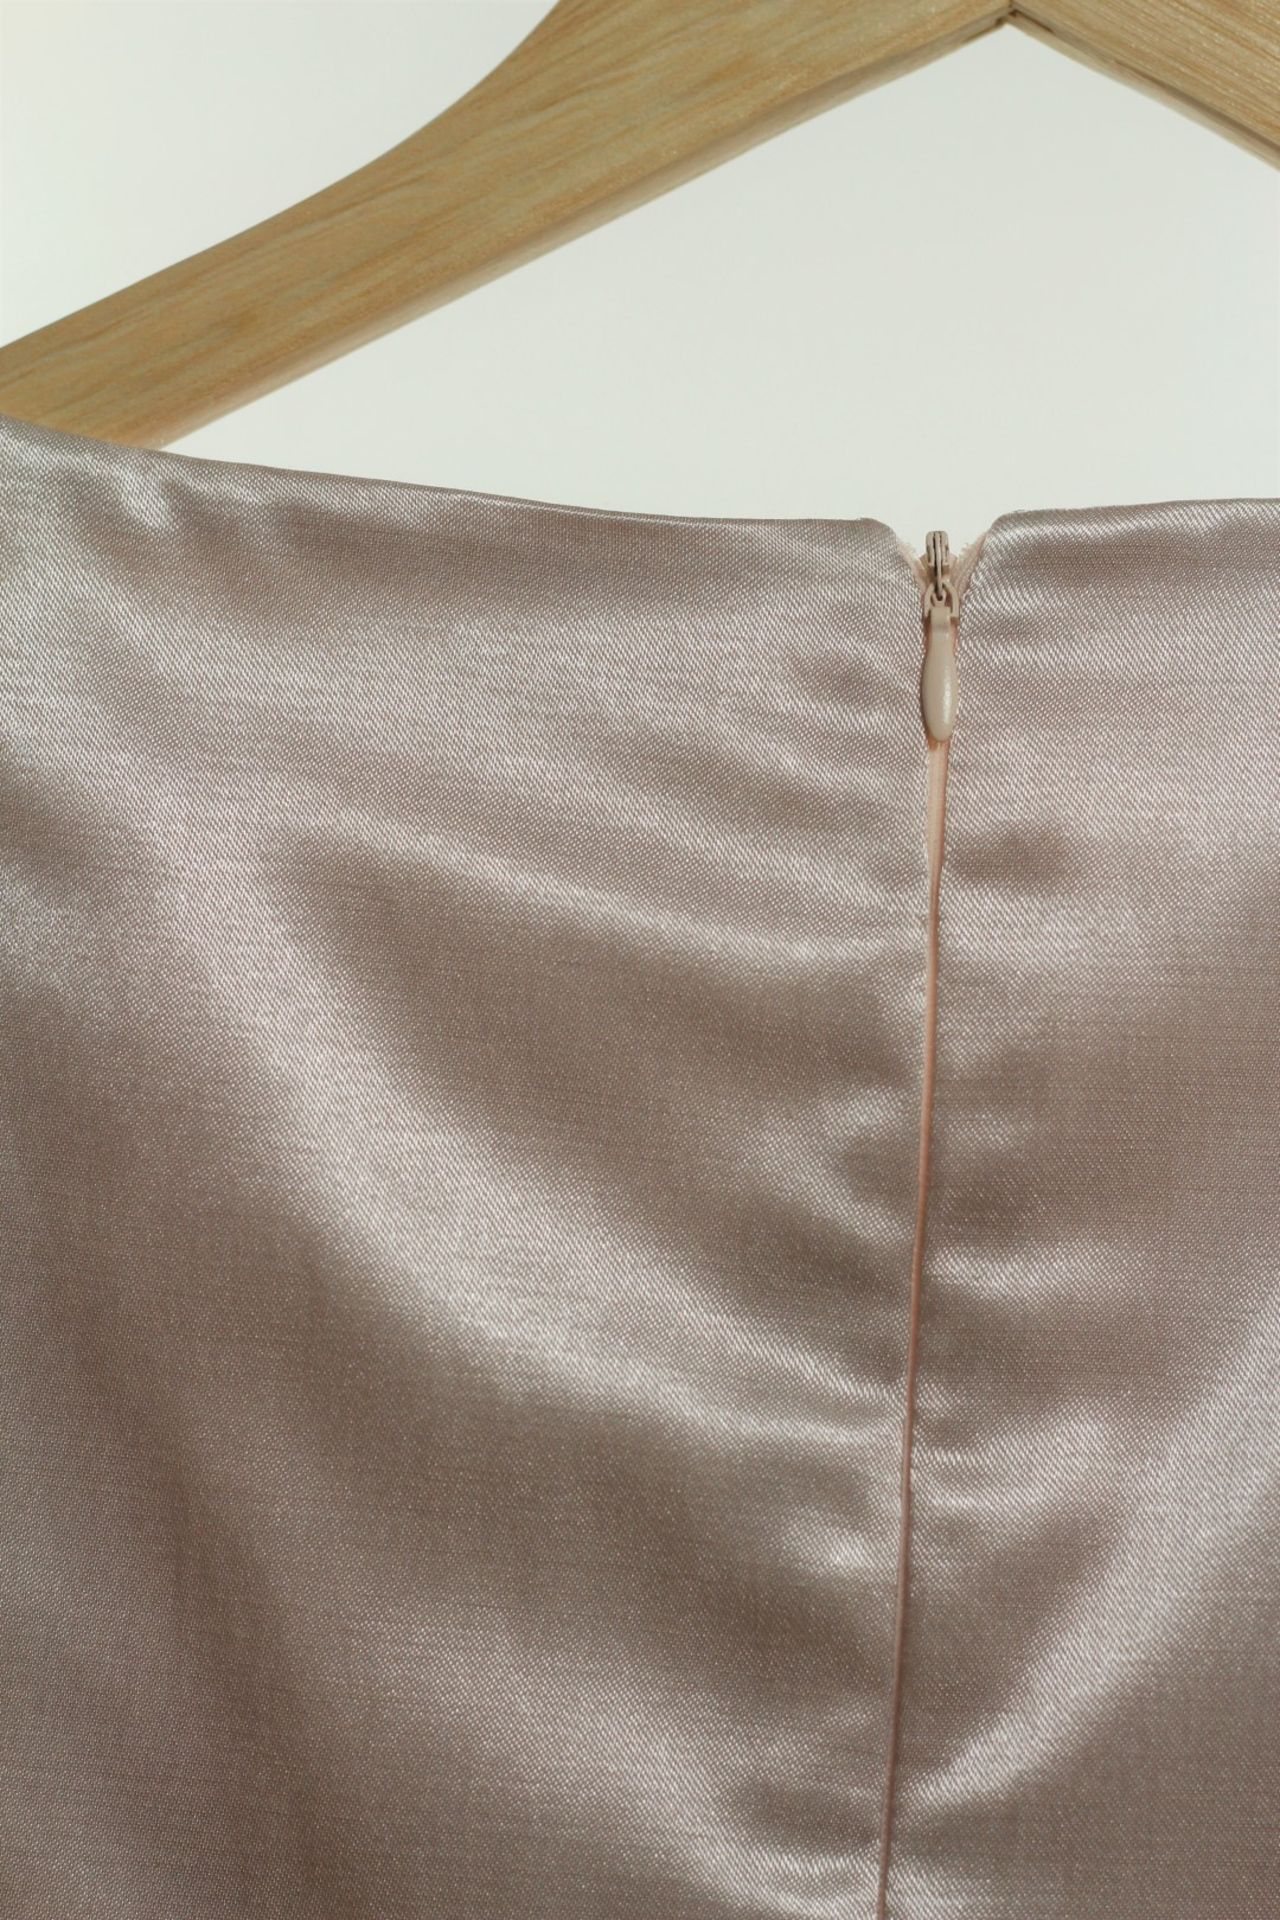 1 x Boutique Le Duc Pale Rose Vest - From a High End Clothing Boutique In The - Image 4 of 8